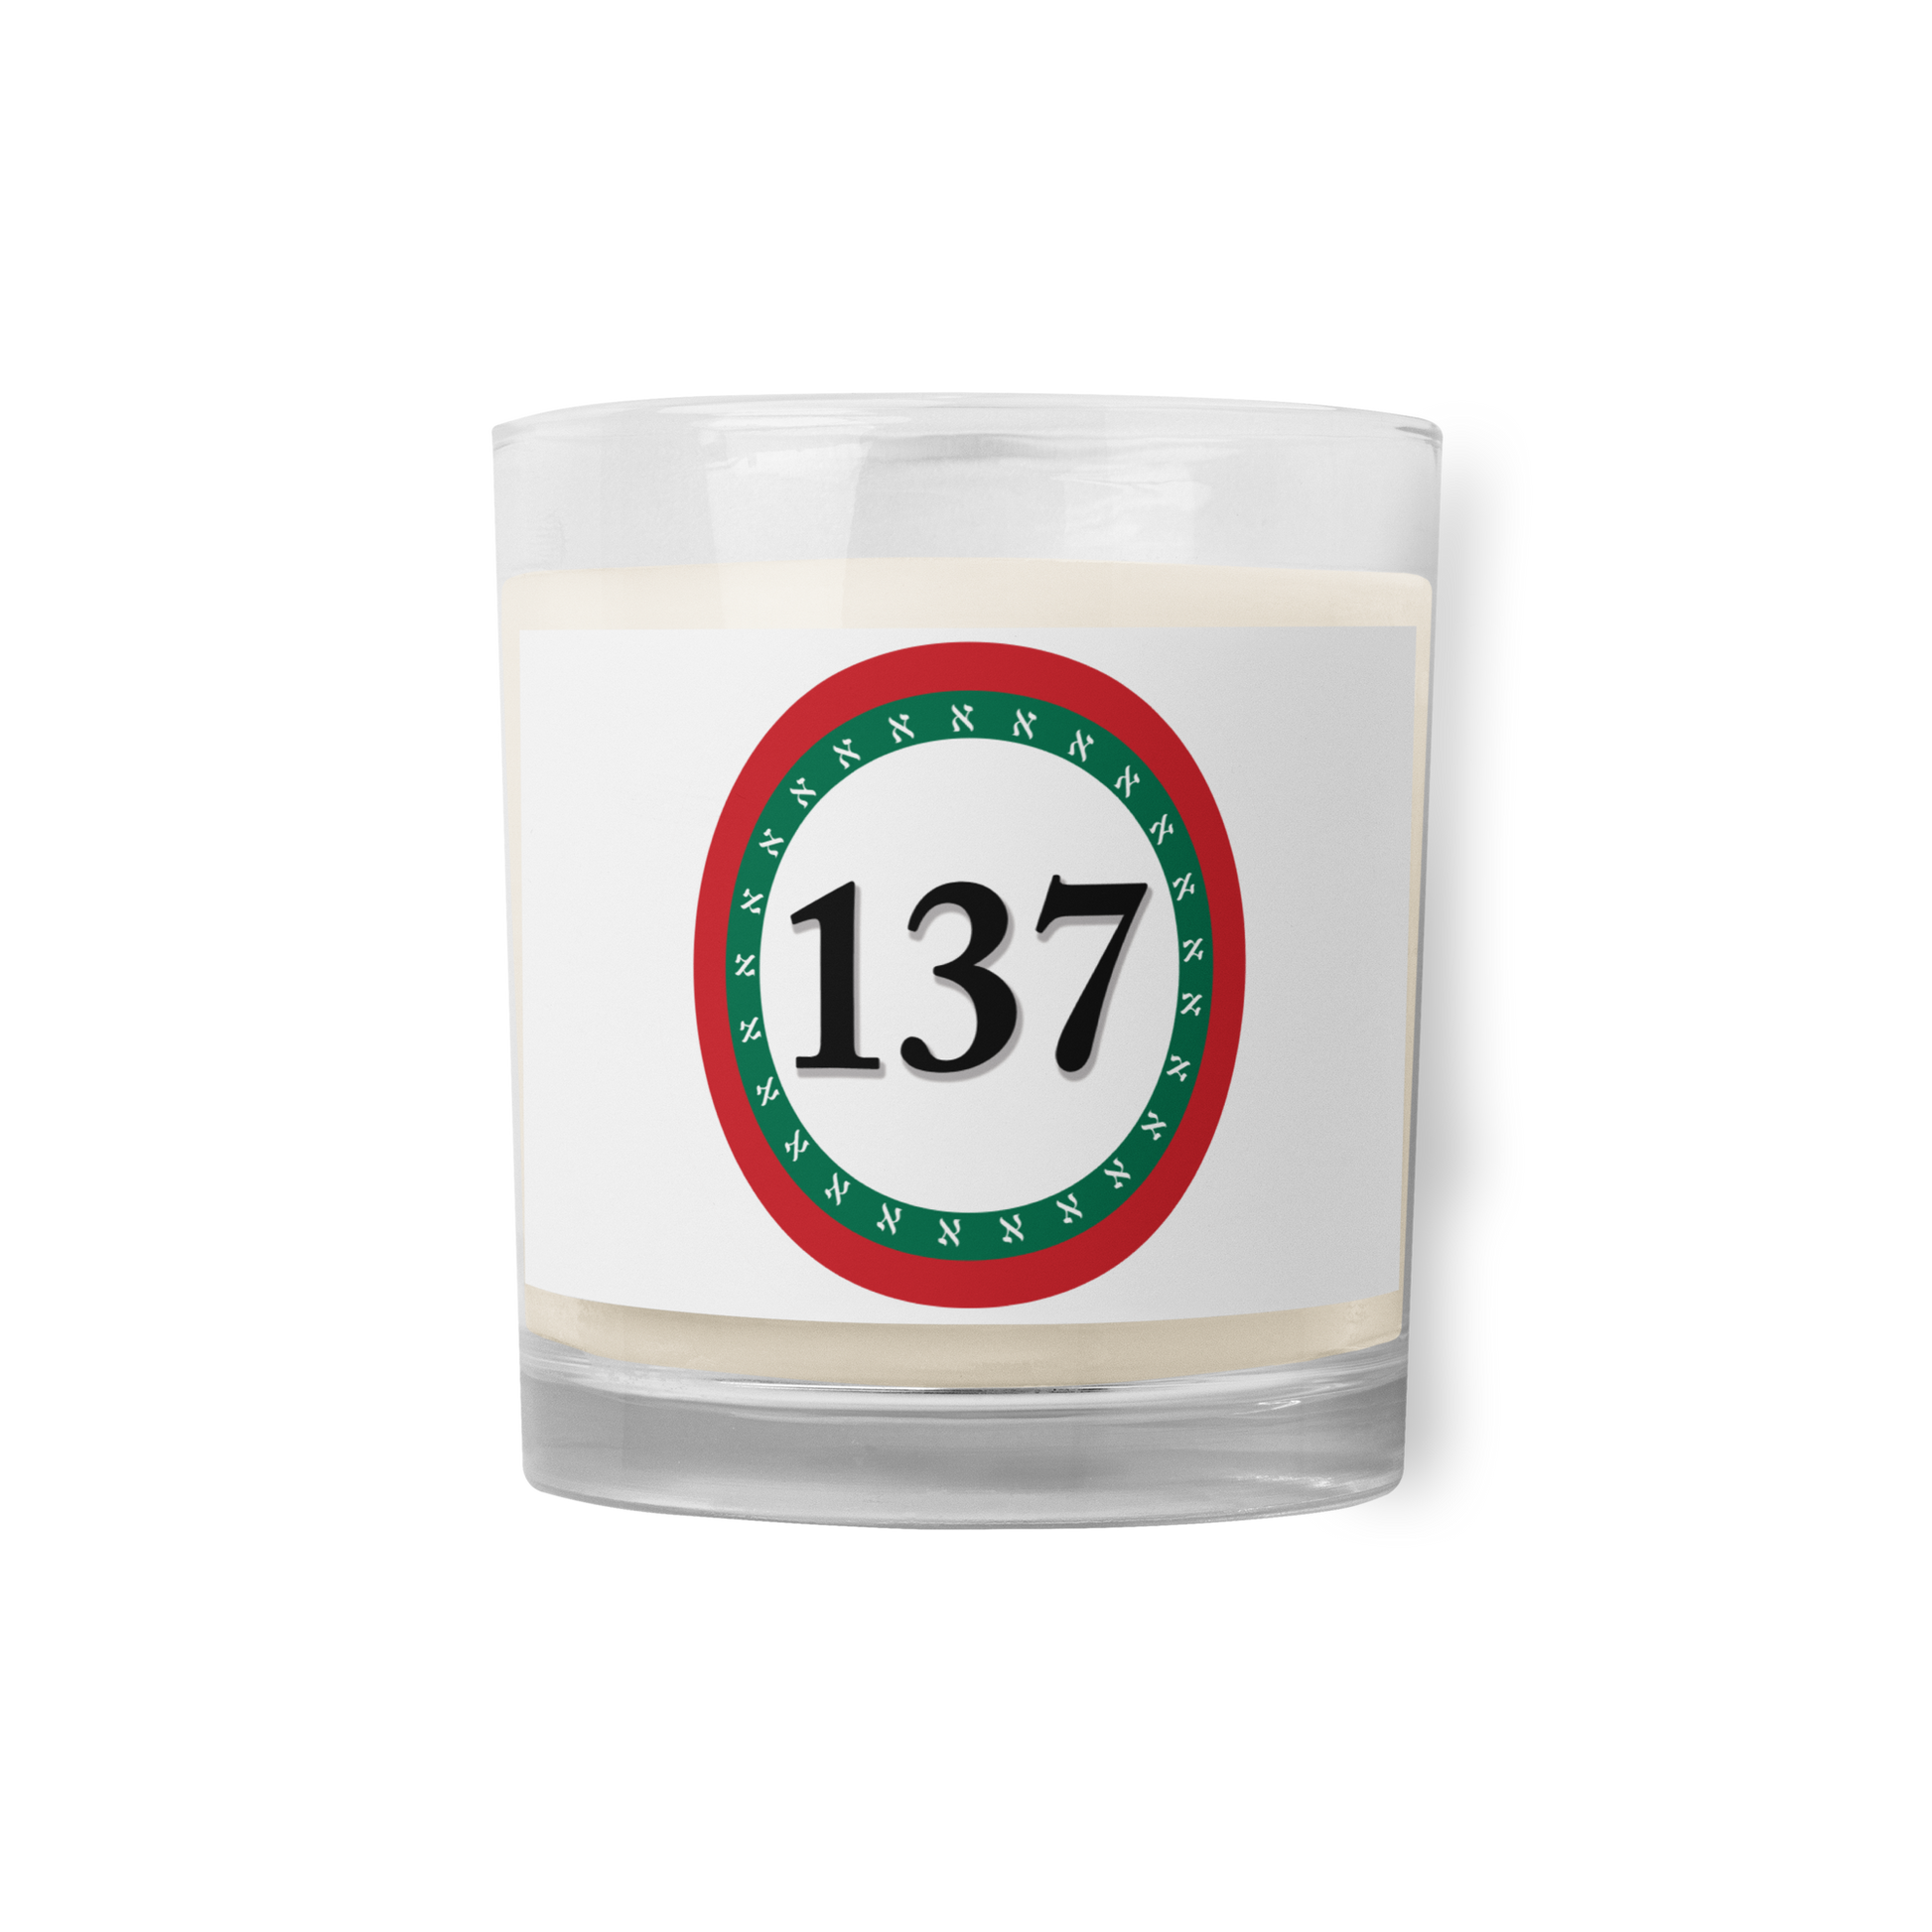 Glass Jar Soy Wax Candle-137 Consciousness-1-137online.com